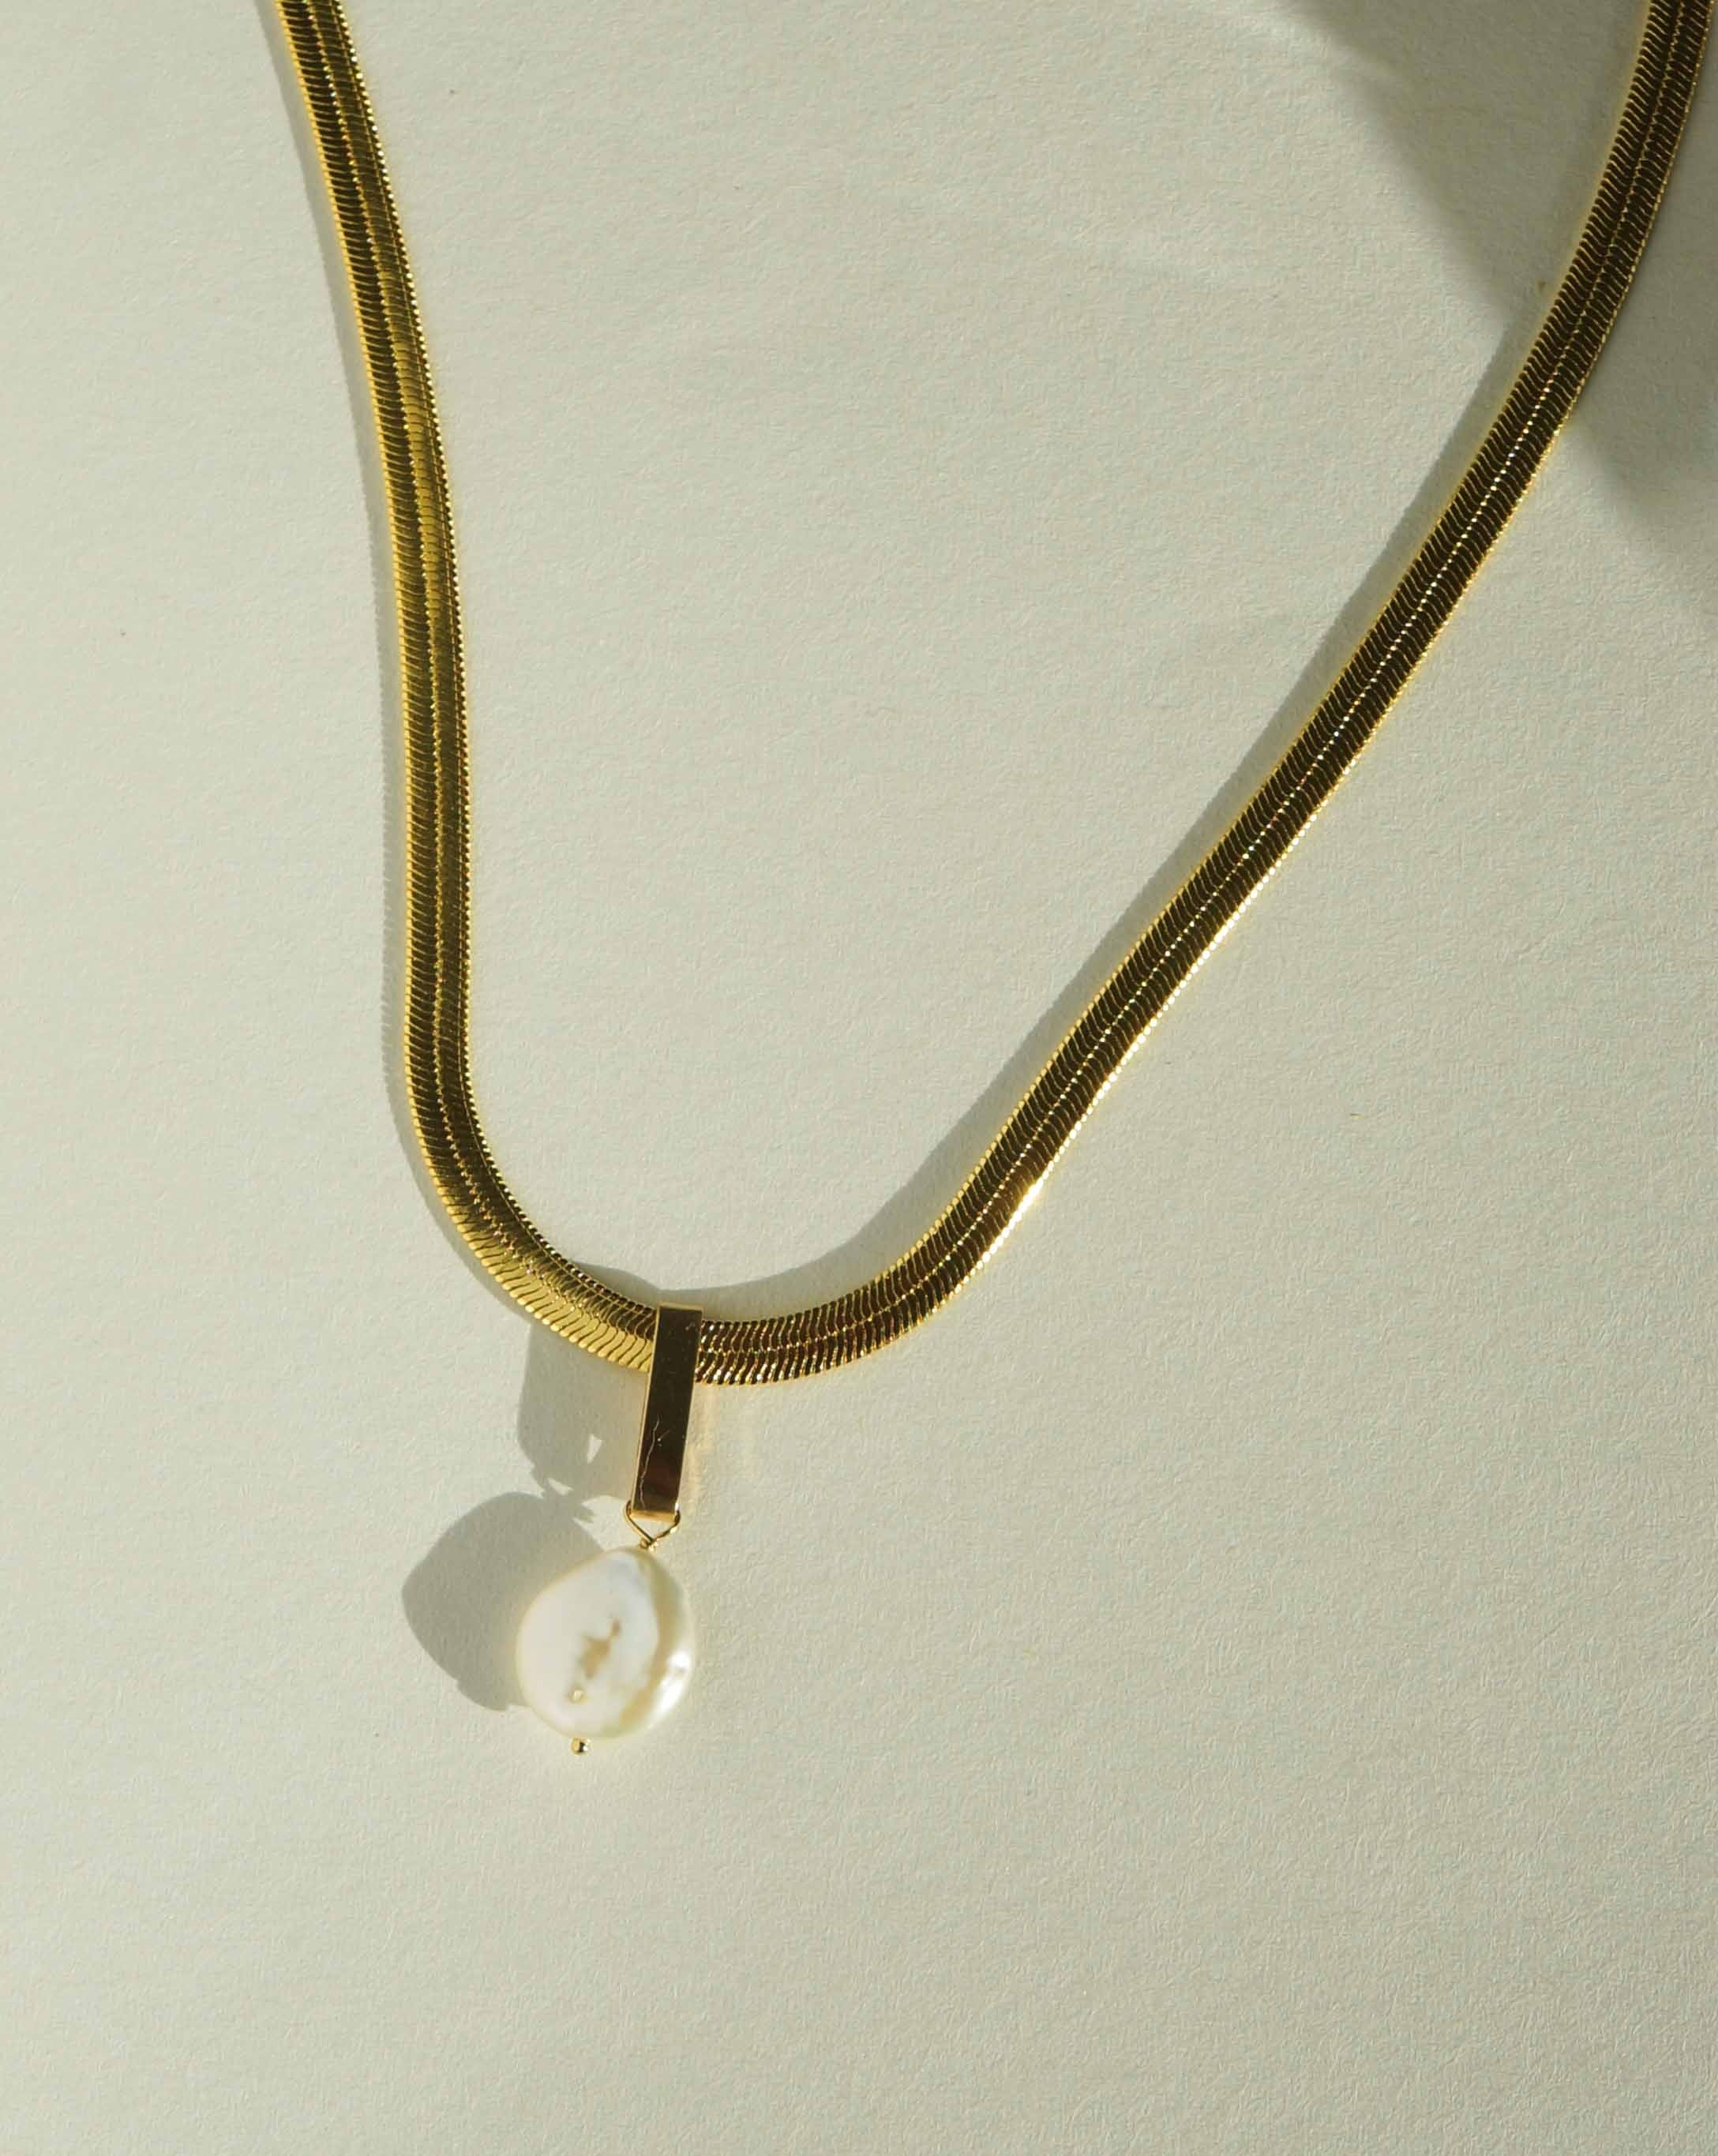 Sam Necklace by KOZAKH. A 16 inches long Herringbone chain necklace, crafted in 18K Gold bonded chain with anti-tarnish treatment, featuring a white tail coin Pearl.